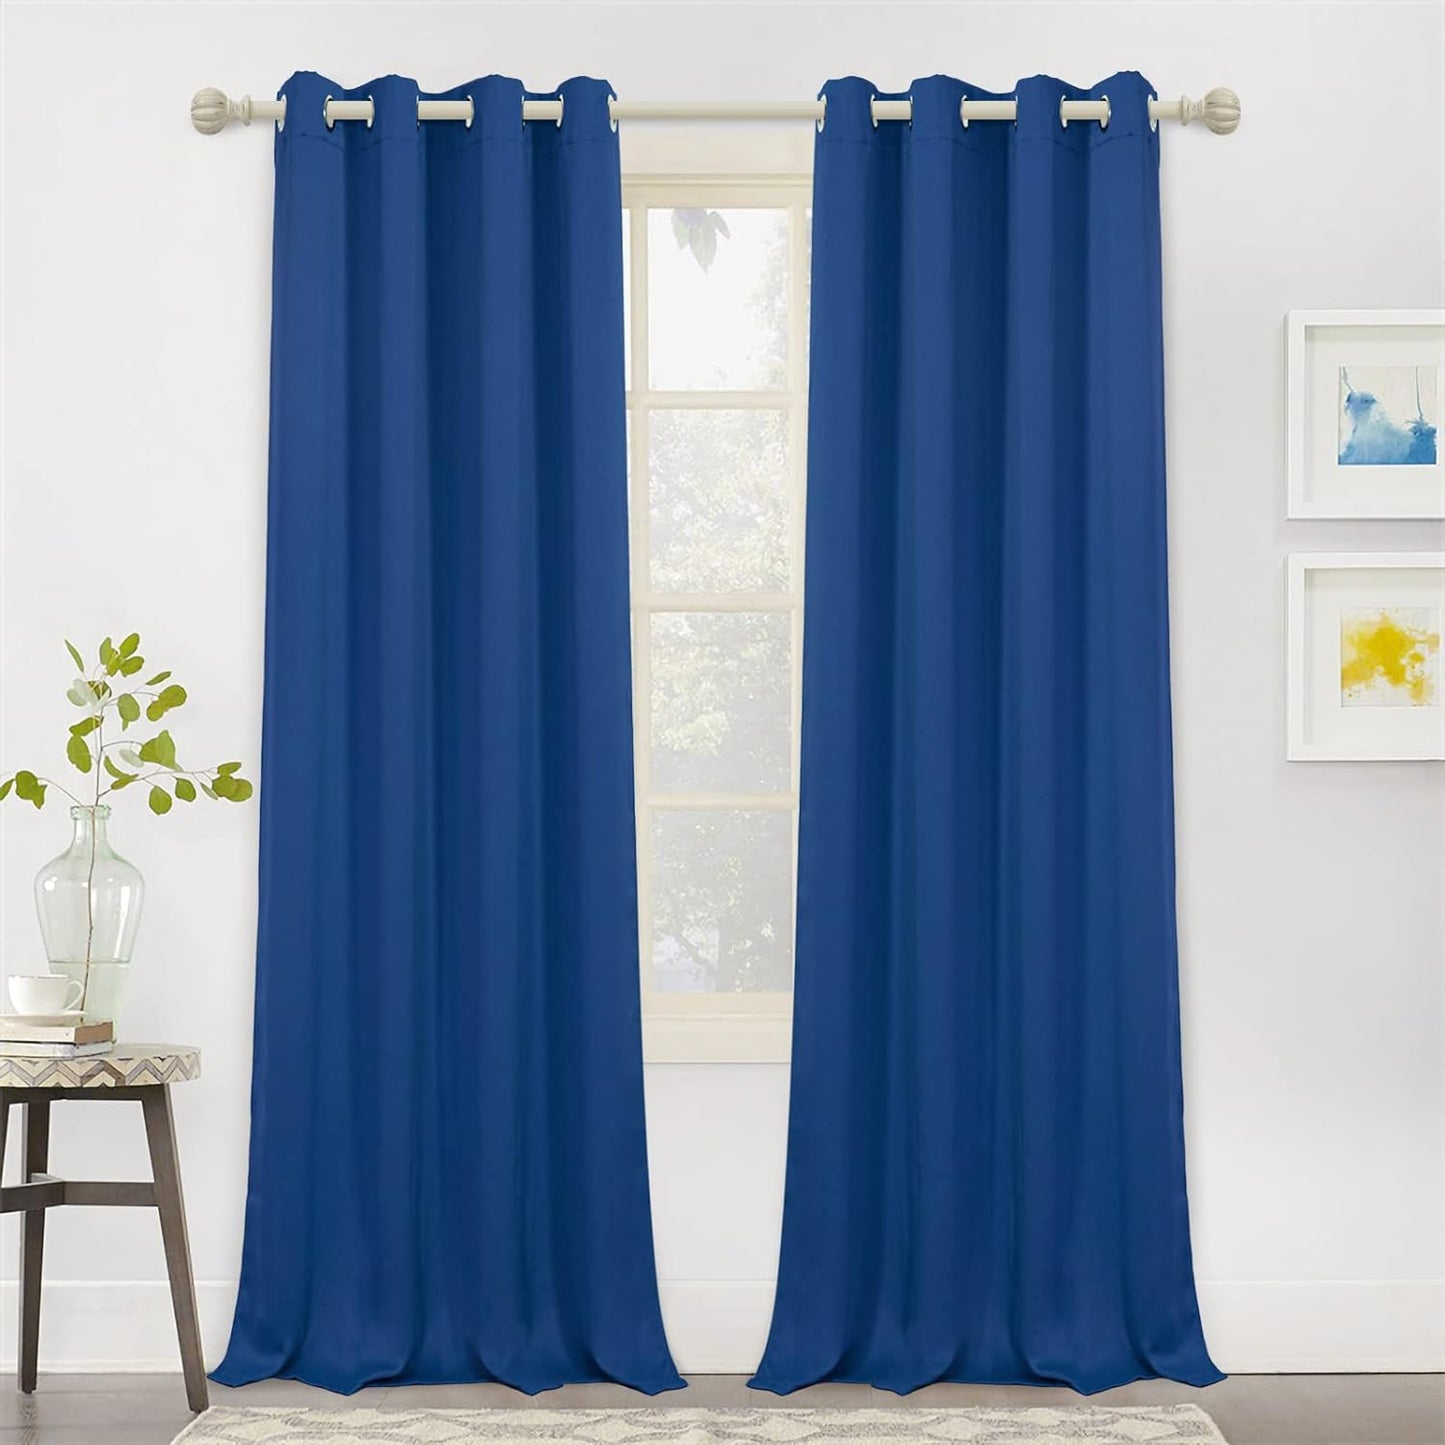 MYSKY HOME Black Curtains for Bedroom 90 Inch Long Blackout Curtains for Living Room 2 Panels Thermal Insulated Grommet Room Darkening Curtains Privacy Protect Window Drapes, 52 X 90 Inches, Black  MYSKY HOME Royal Blue 52W X 95L 